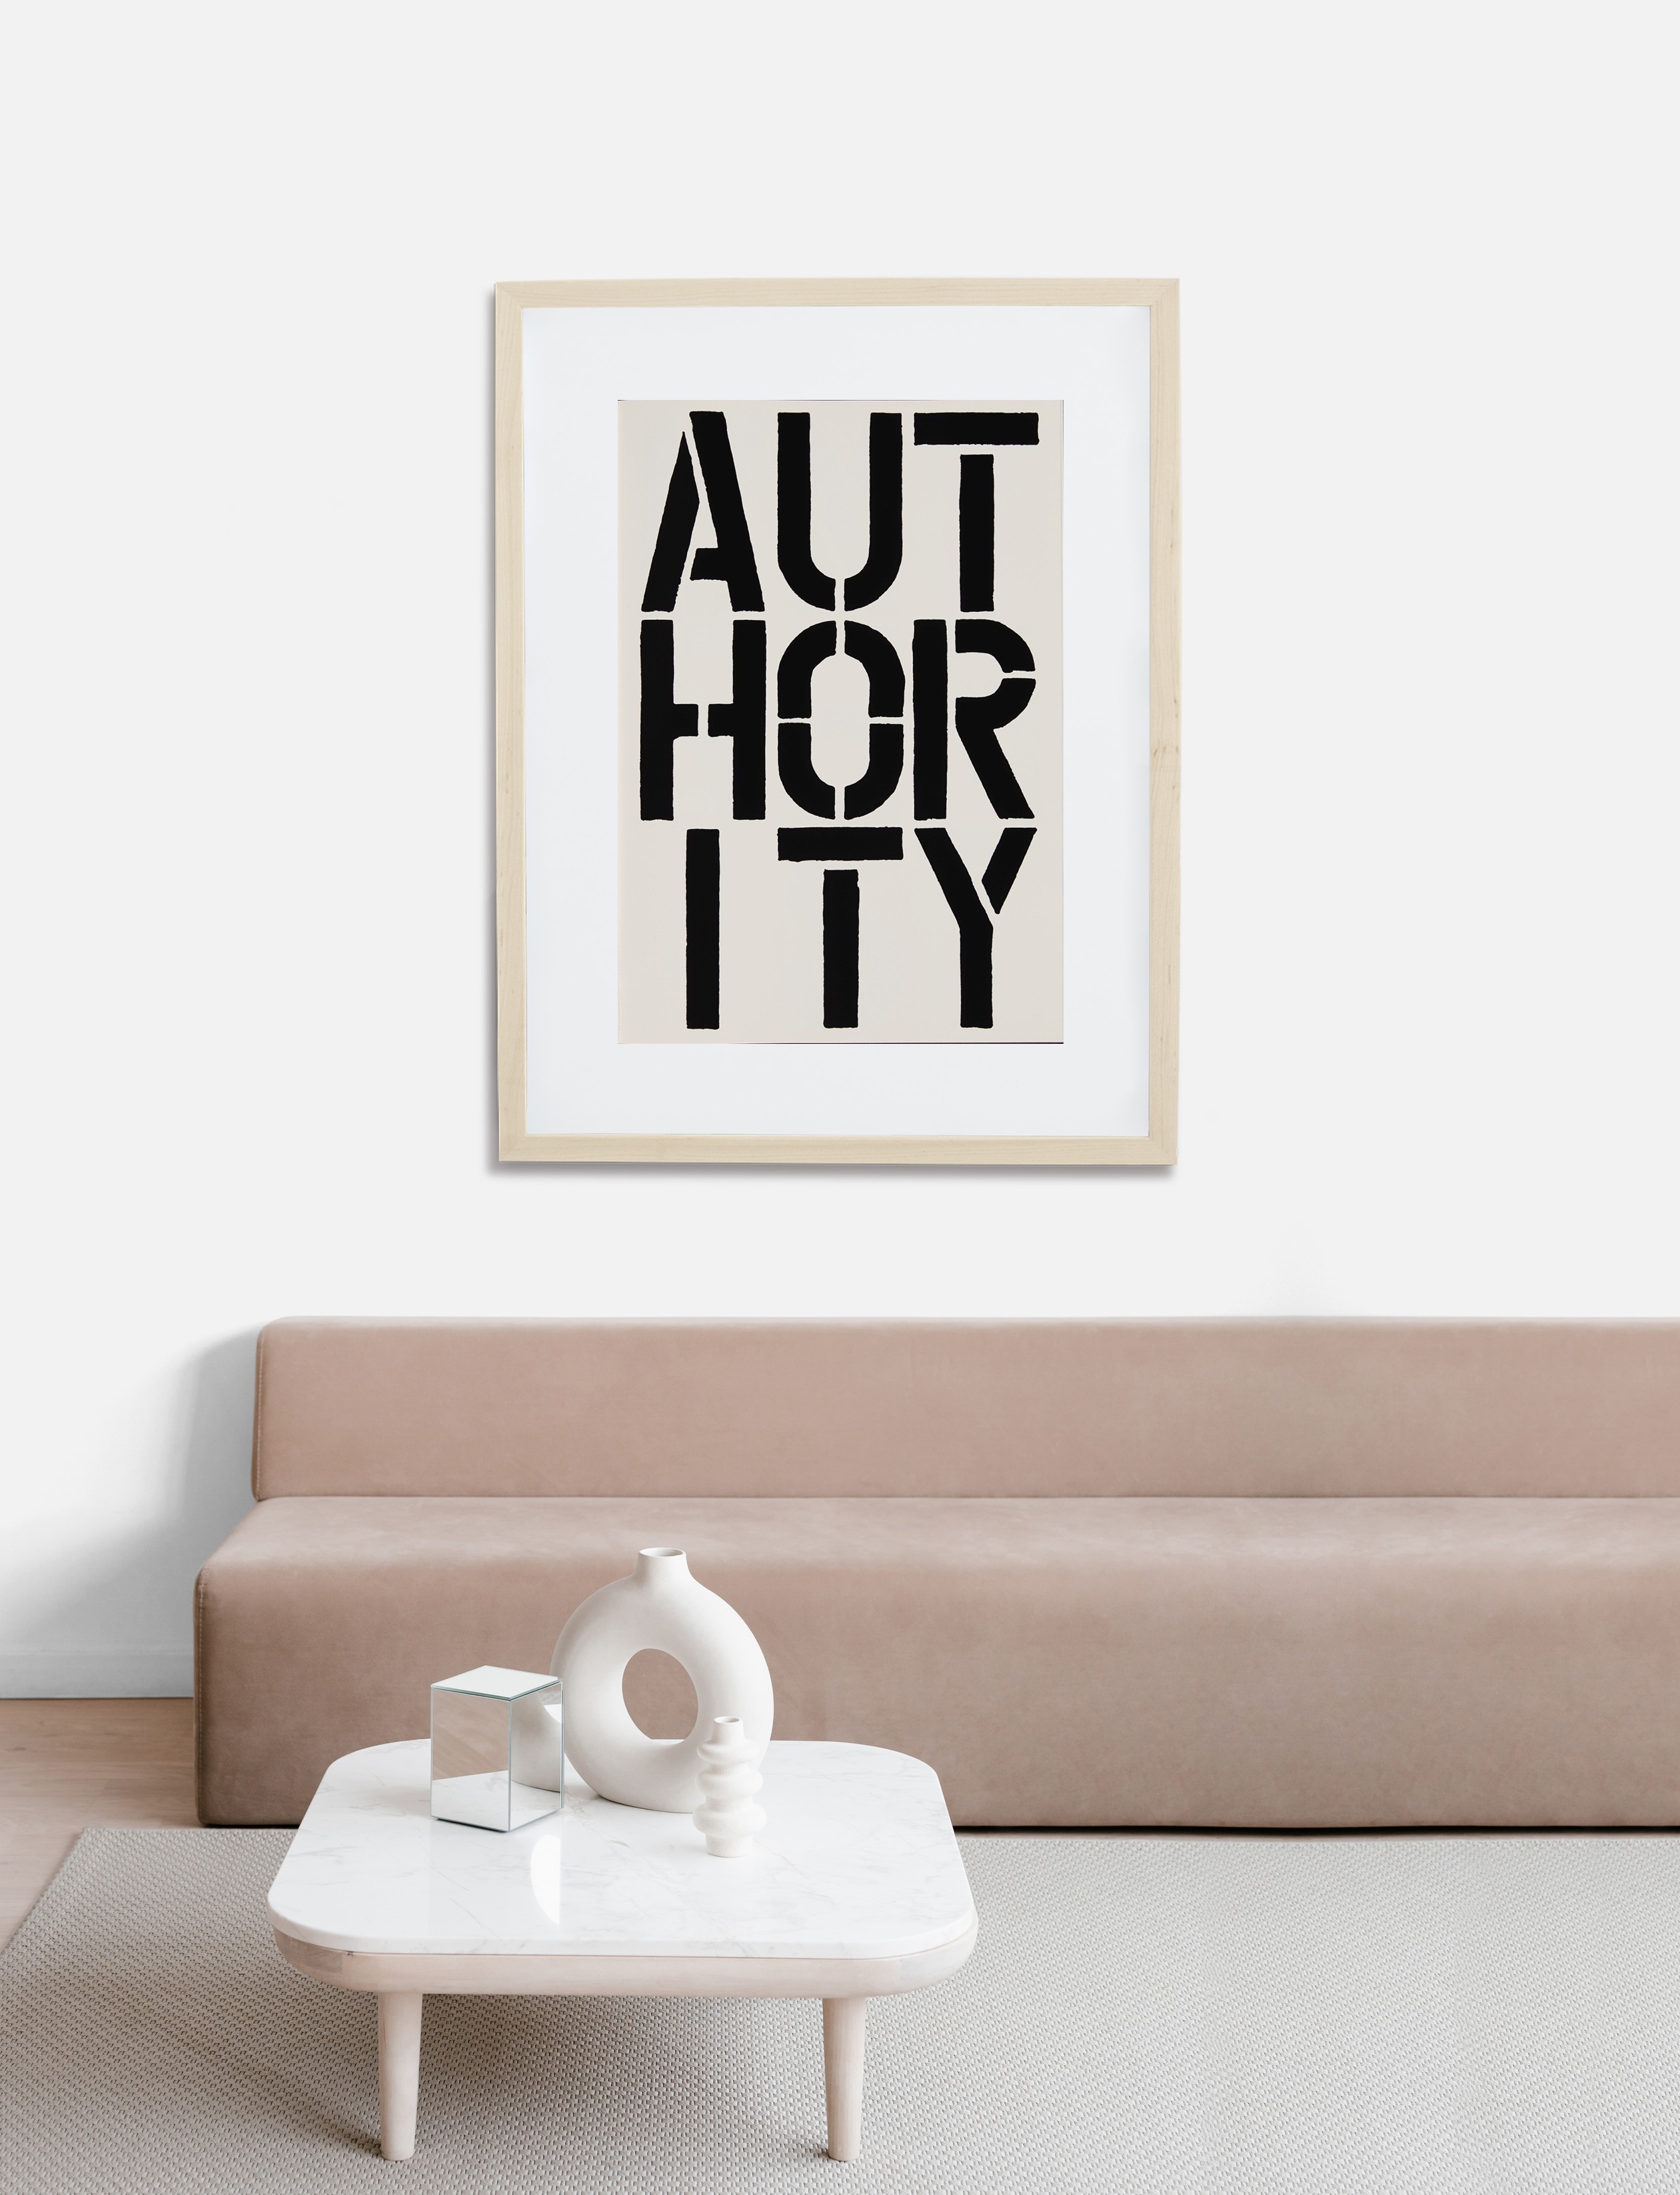 Authority (page from Black Book), 1989